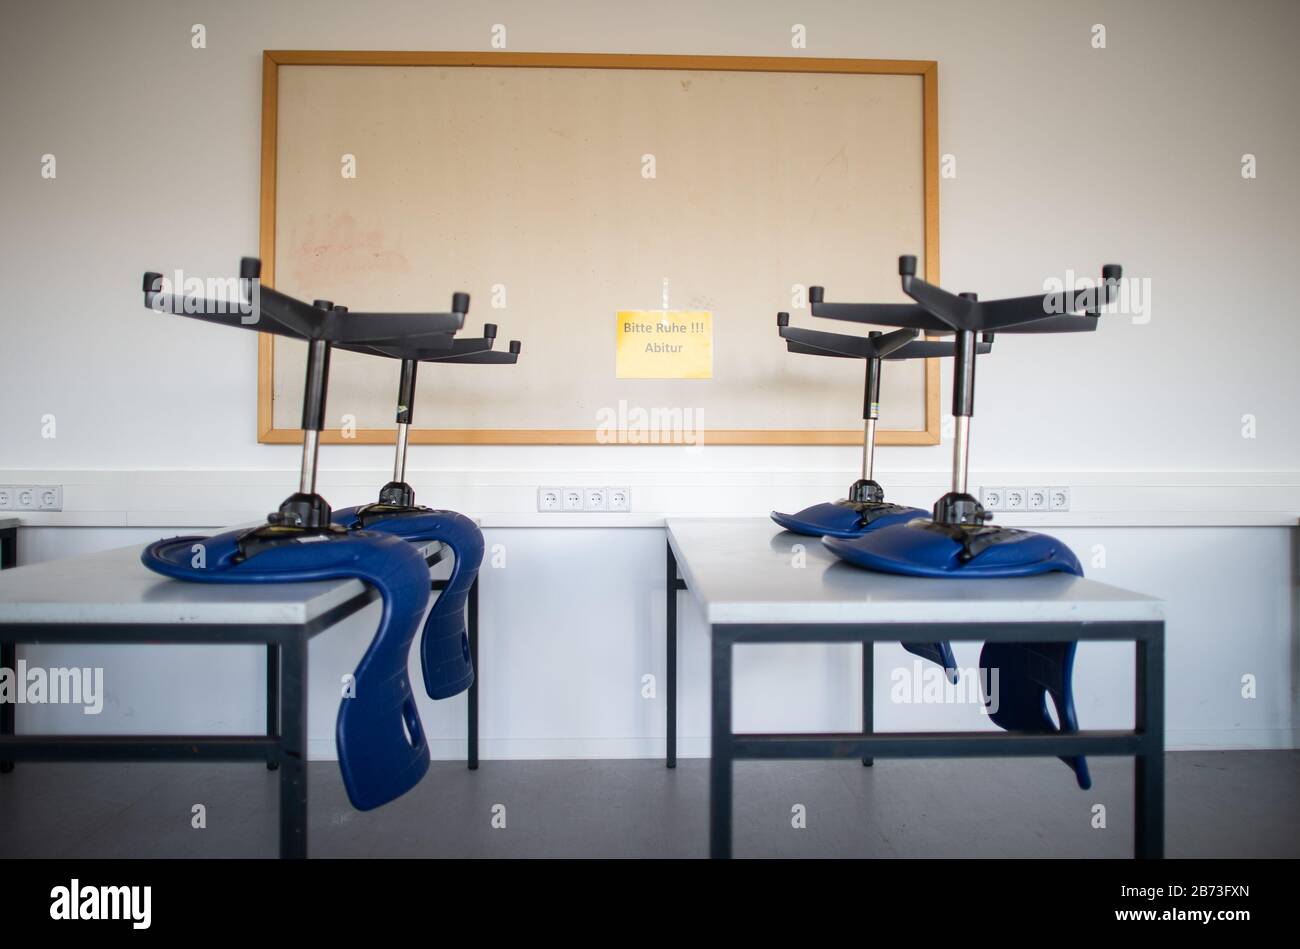 13 March 2020, North Rhine-Westphalia, Übach-Palenberg: Chairs stand on tables in an empty classroom in the Carolus-Magnus-Gymnasium, while on the wall there is a sign saying 'Please be quiet! Abitur' can be seen on the wall. In the district of Heinsberg the schools and kindergartens will remain closed for another week, perspectively even until the Easter holidays. Photo: Jonas Güttler/dpa Stock Photo